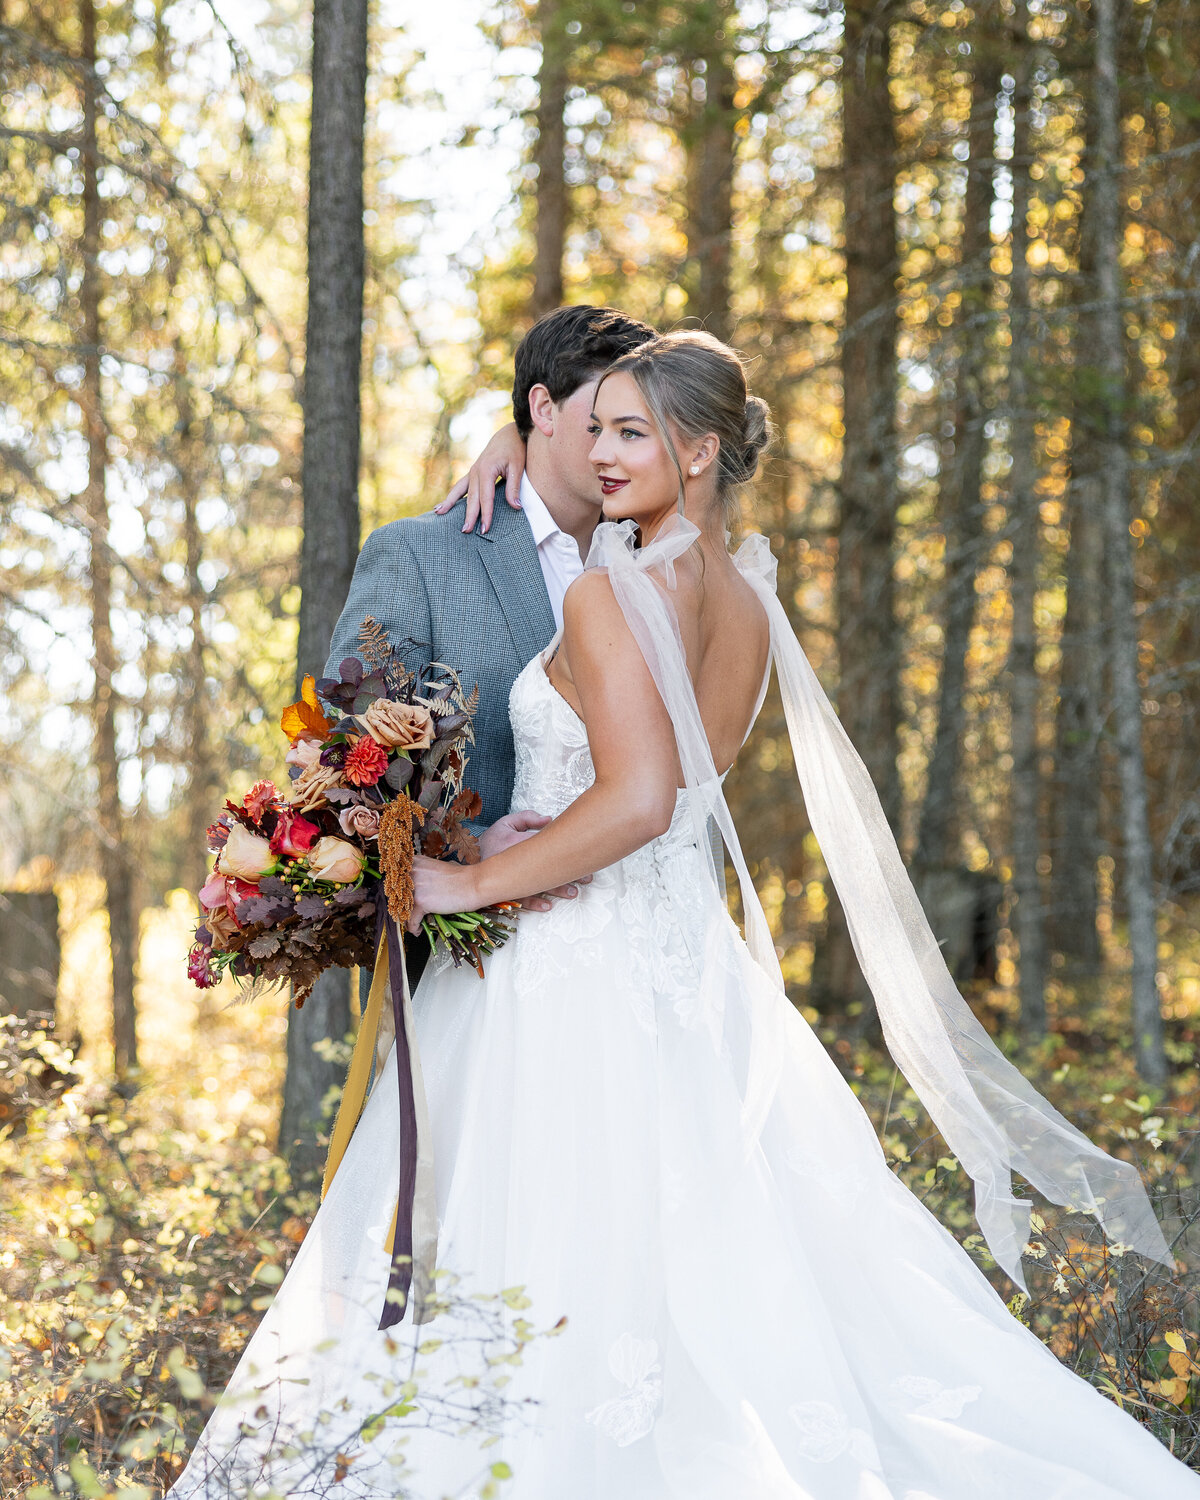 An adventurous wedding photographer in Glacier National Park. Best ceremony locations in Glacier National park for weddings and eloping couples.